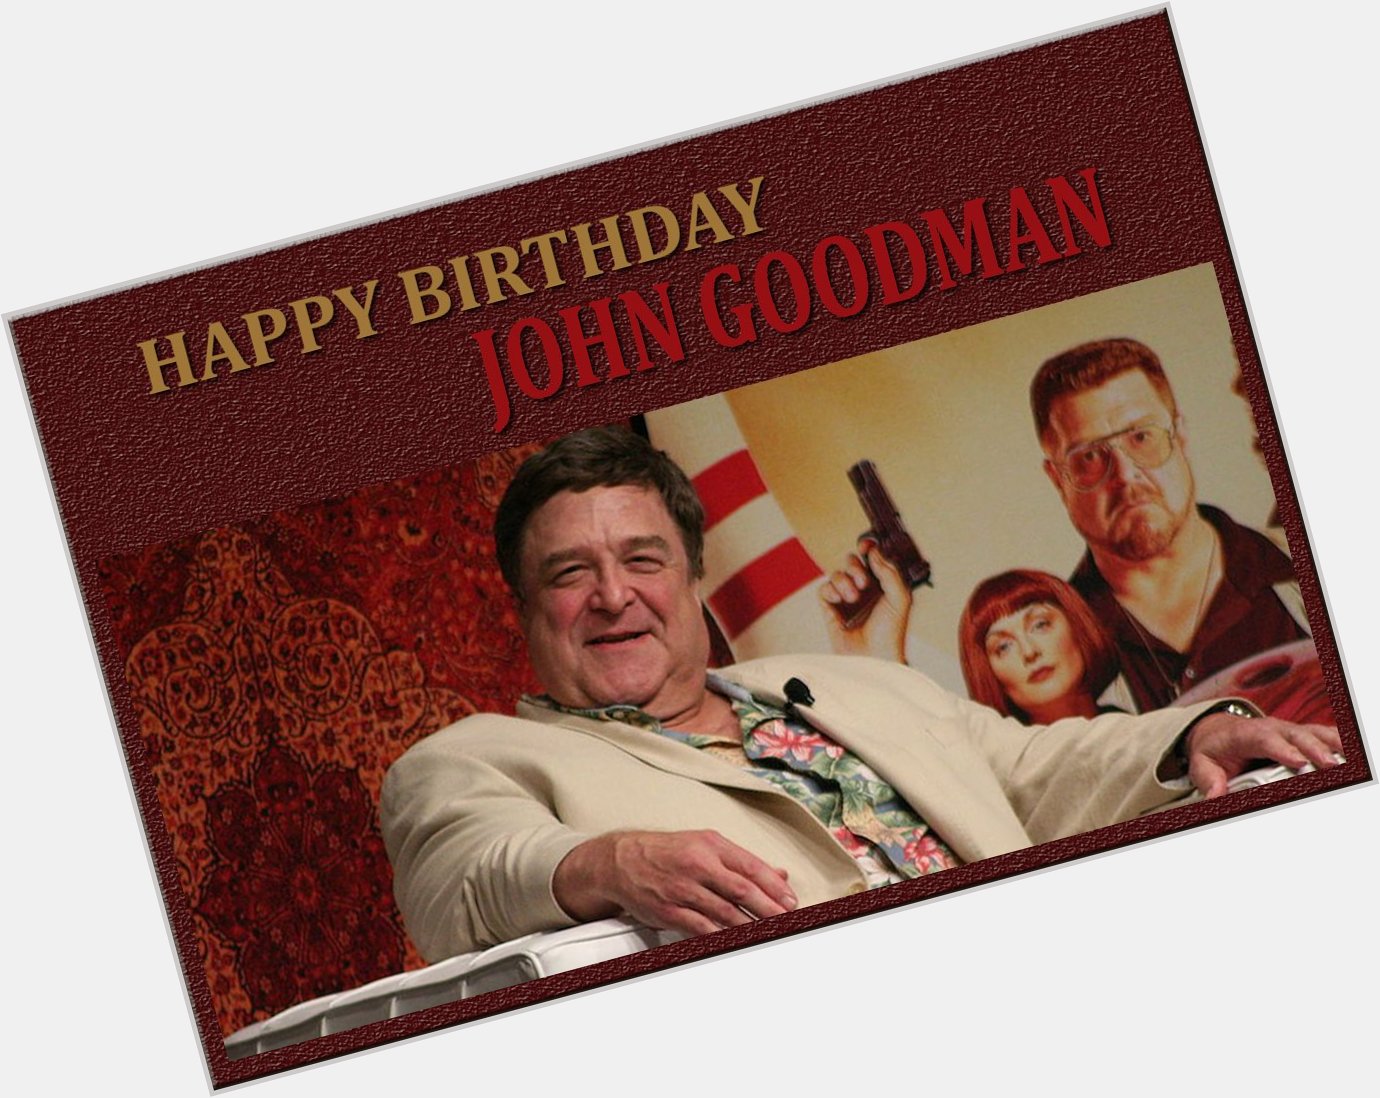 Indywood sending you A Birthday Wish Wrapped With our Love.
Have a Happy Birthday John Goodman!! 